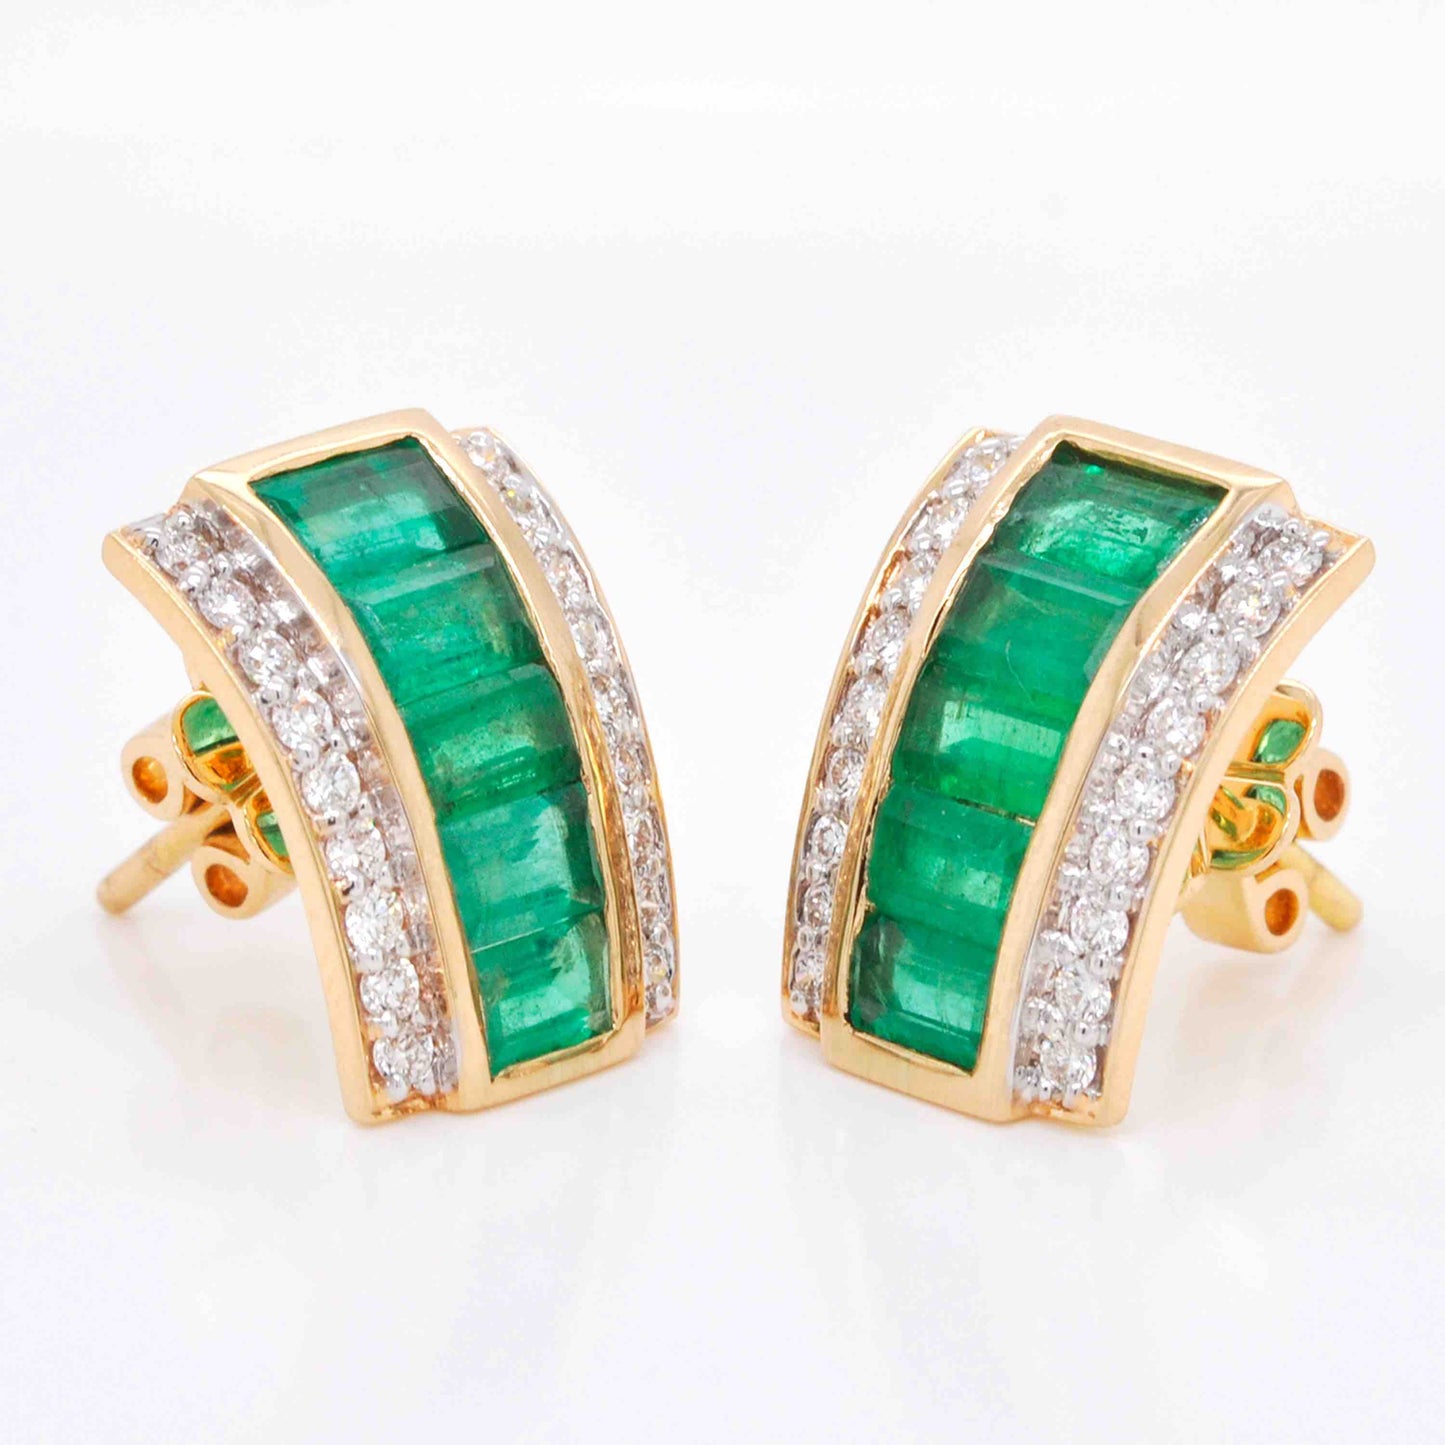 Stud earrings with emeralds